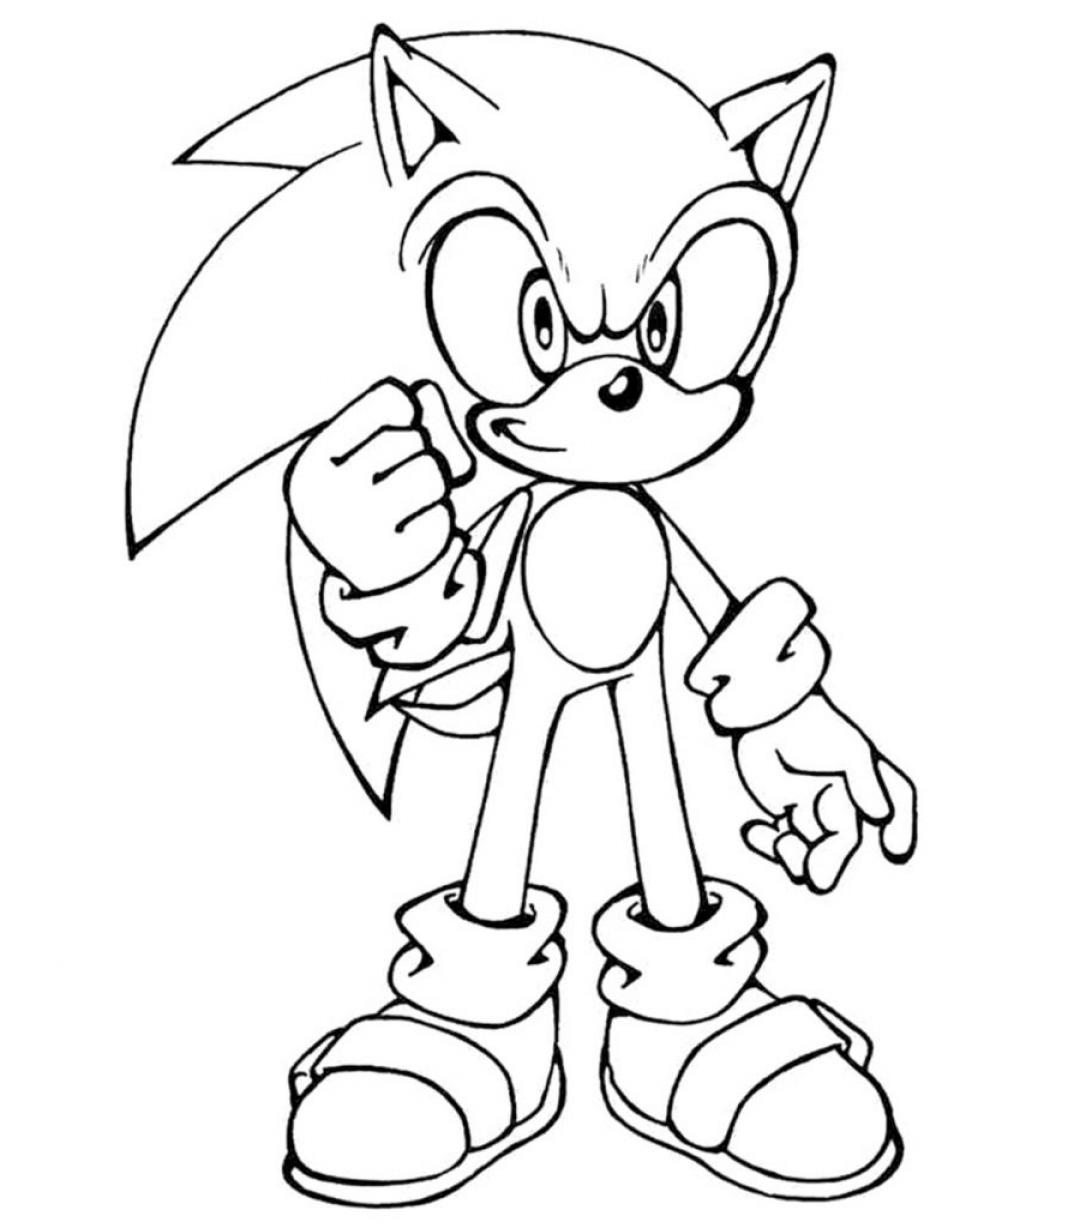 Sonic The Hedgehog Coloring Pages - Free Printable - SheetalColor.com